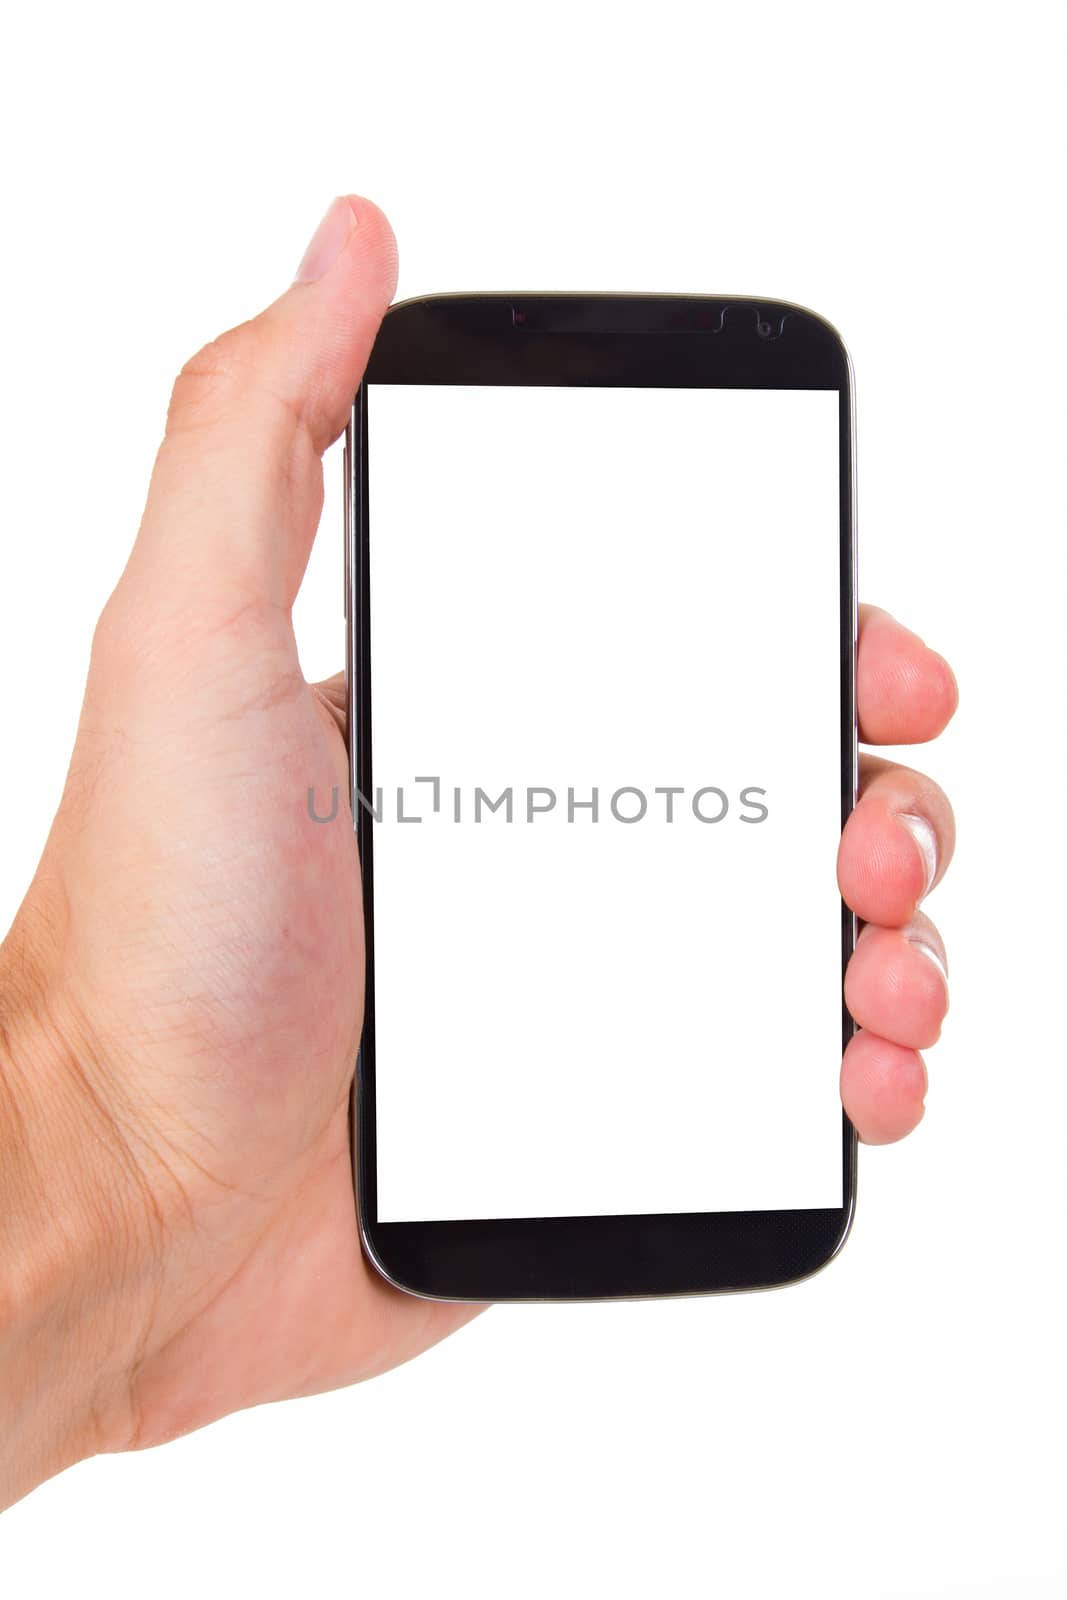 Hand holding mobile phone with blank, white screen, front view, isolated on white background.